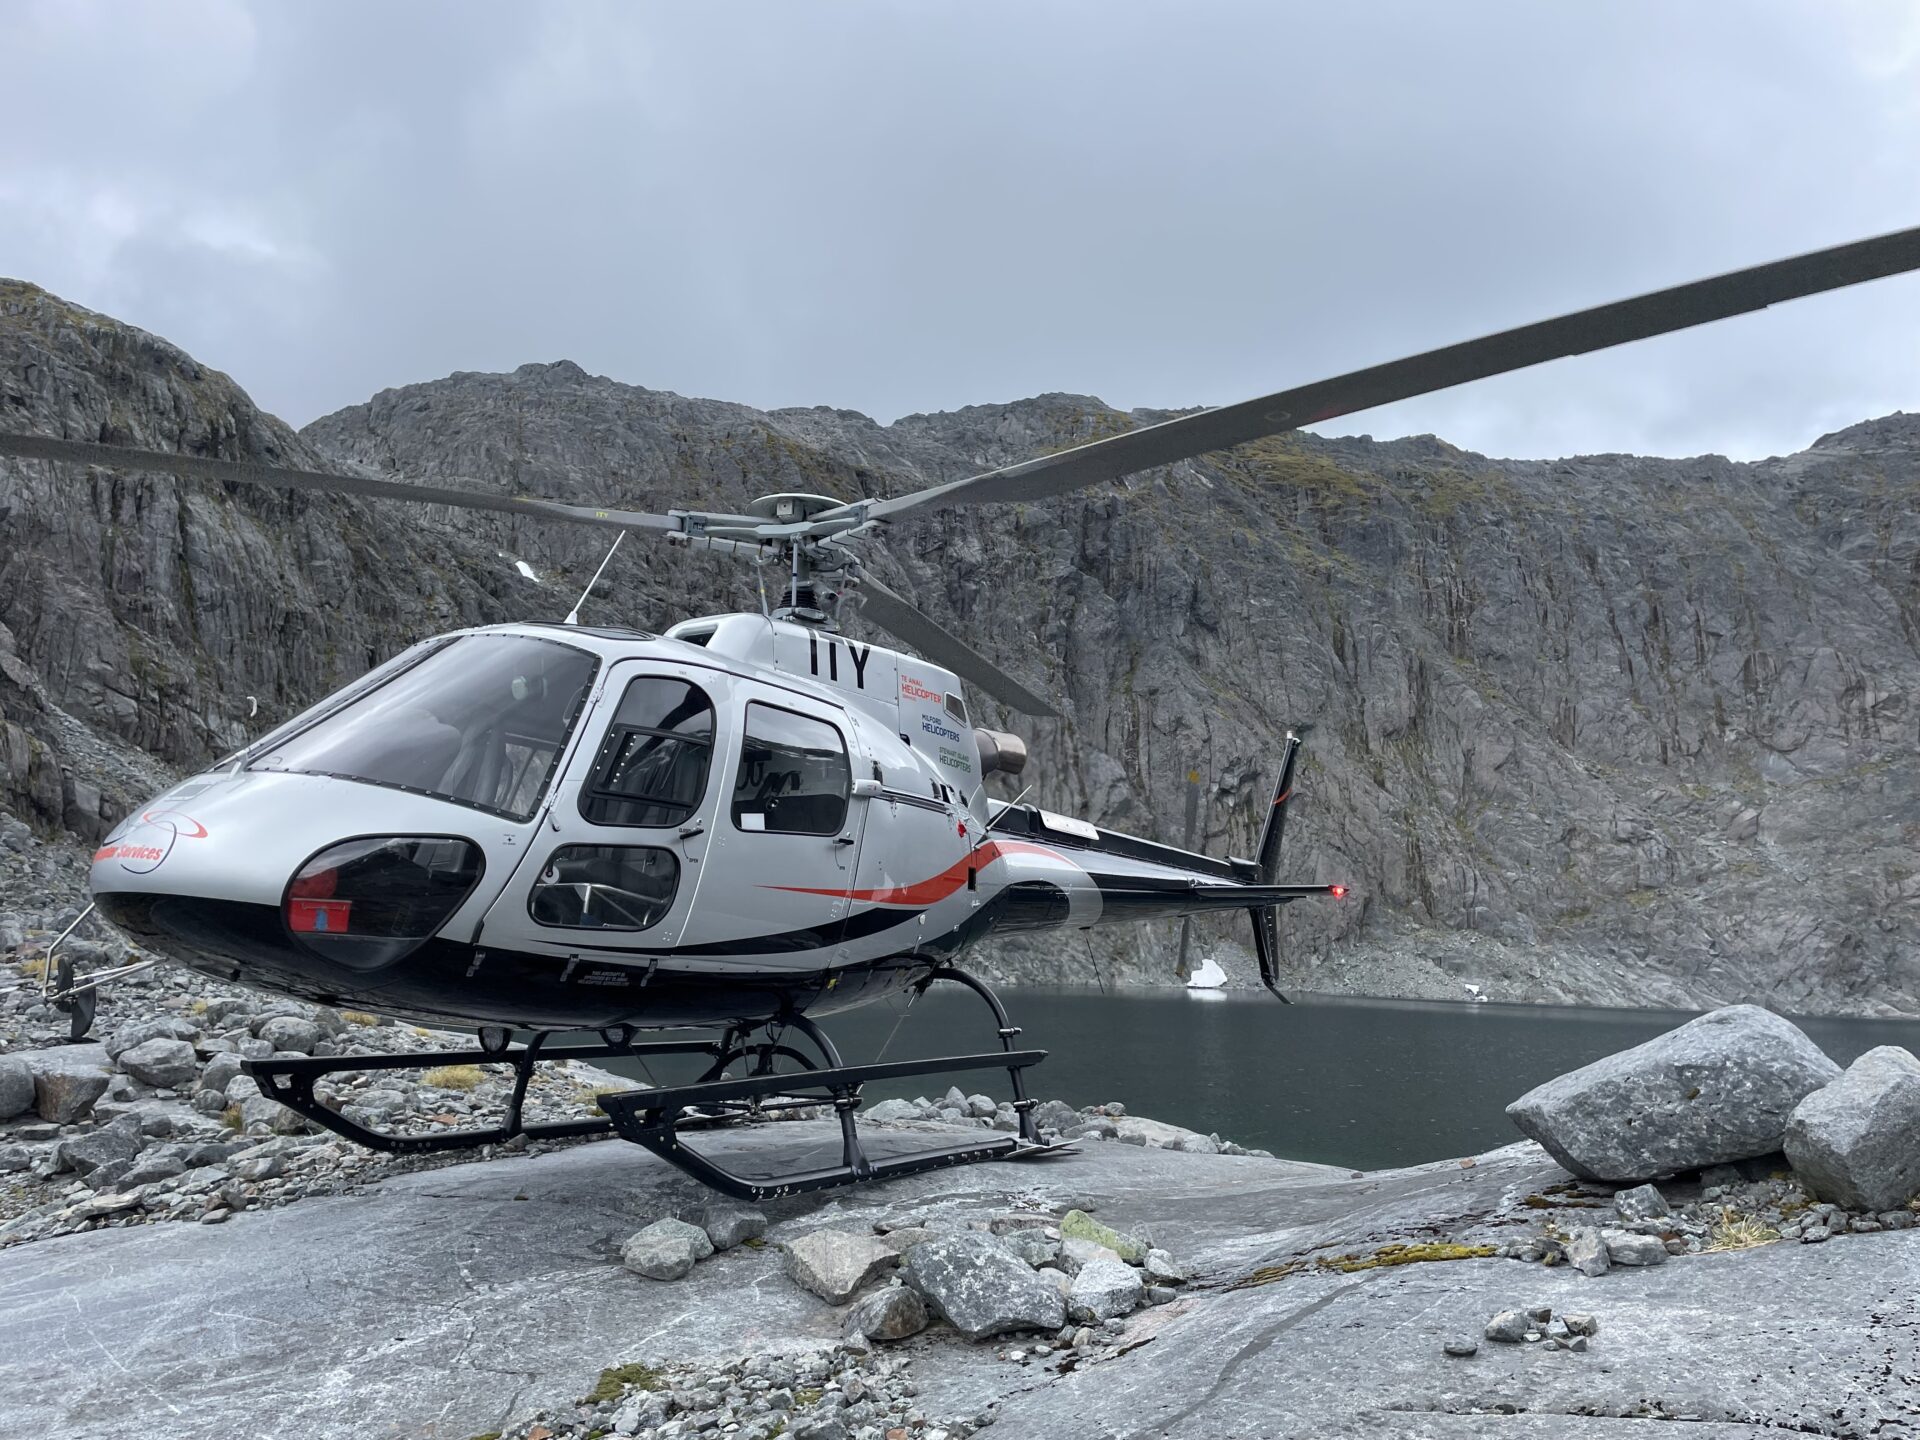 Helicopter landed on rocks in front of lake with rocky hill behind.